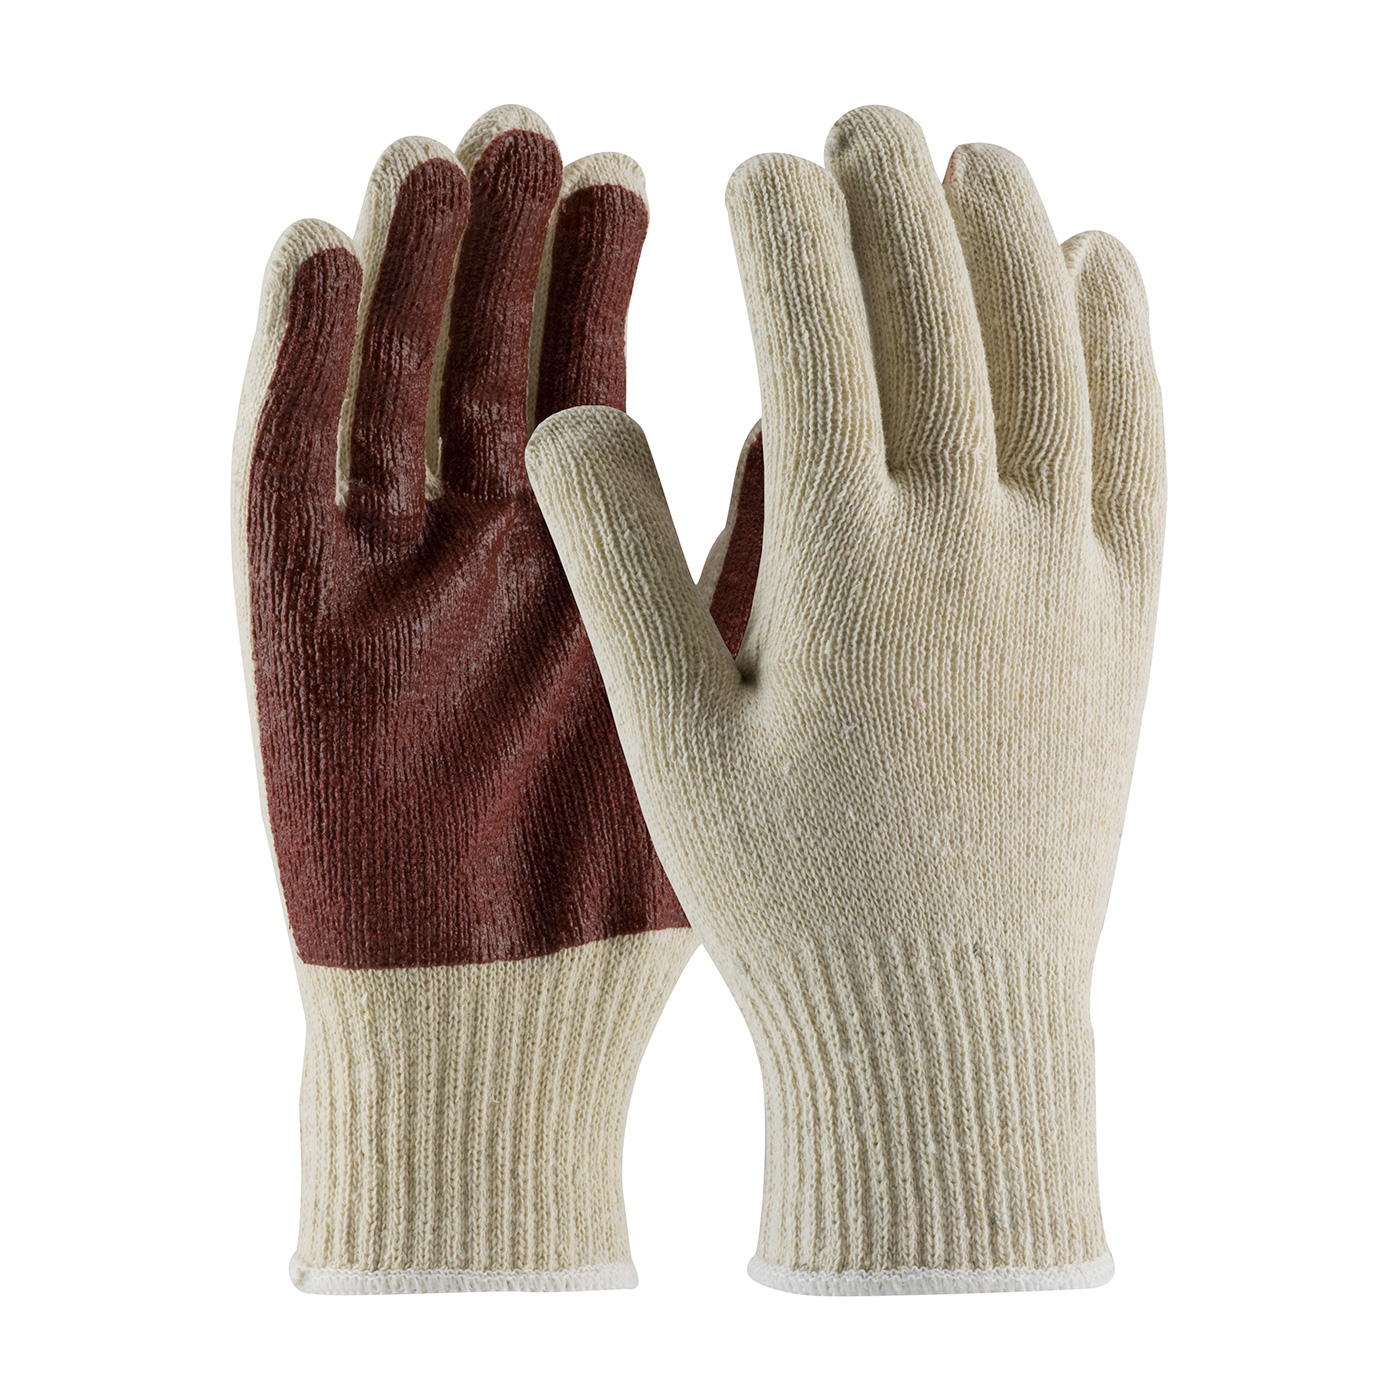 #38-N2110PC PIP® Cotton/Poly Nitrile Coated Glove